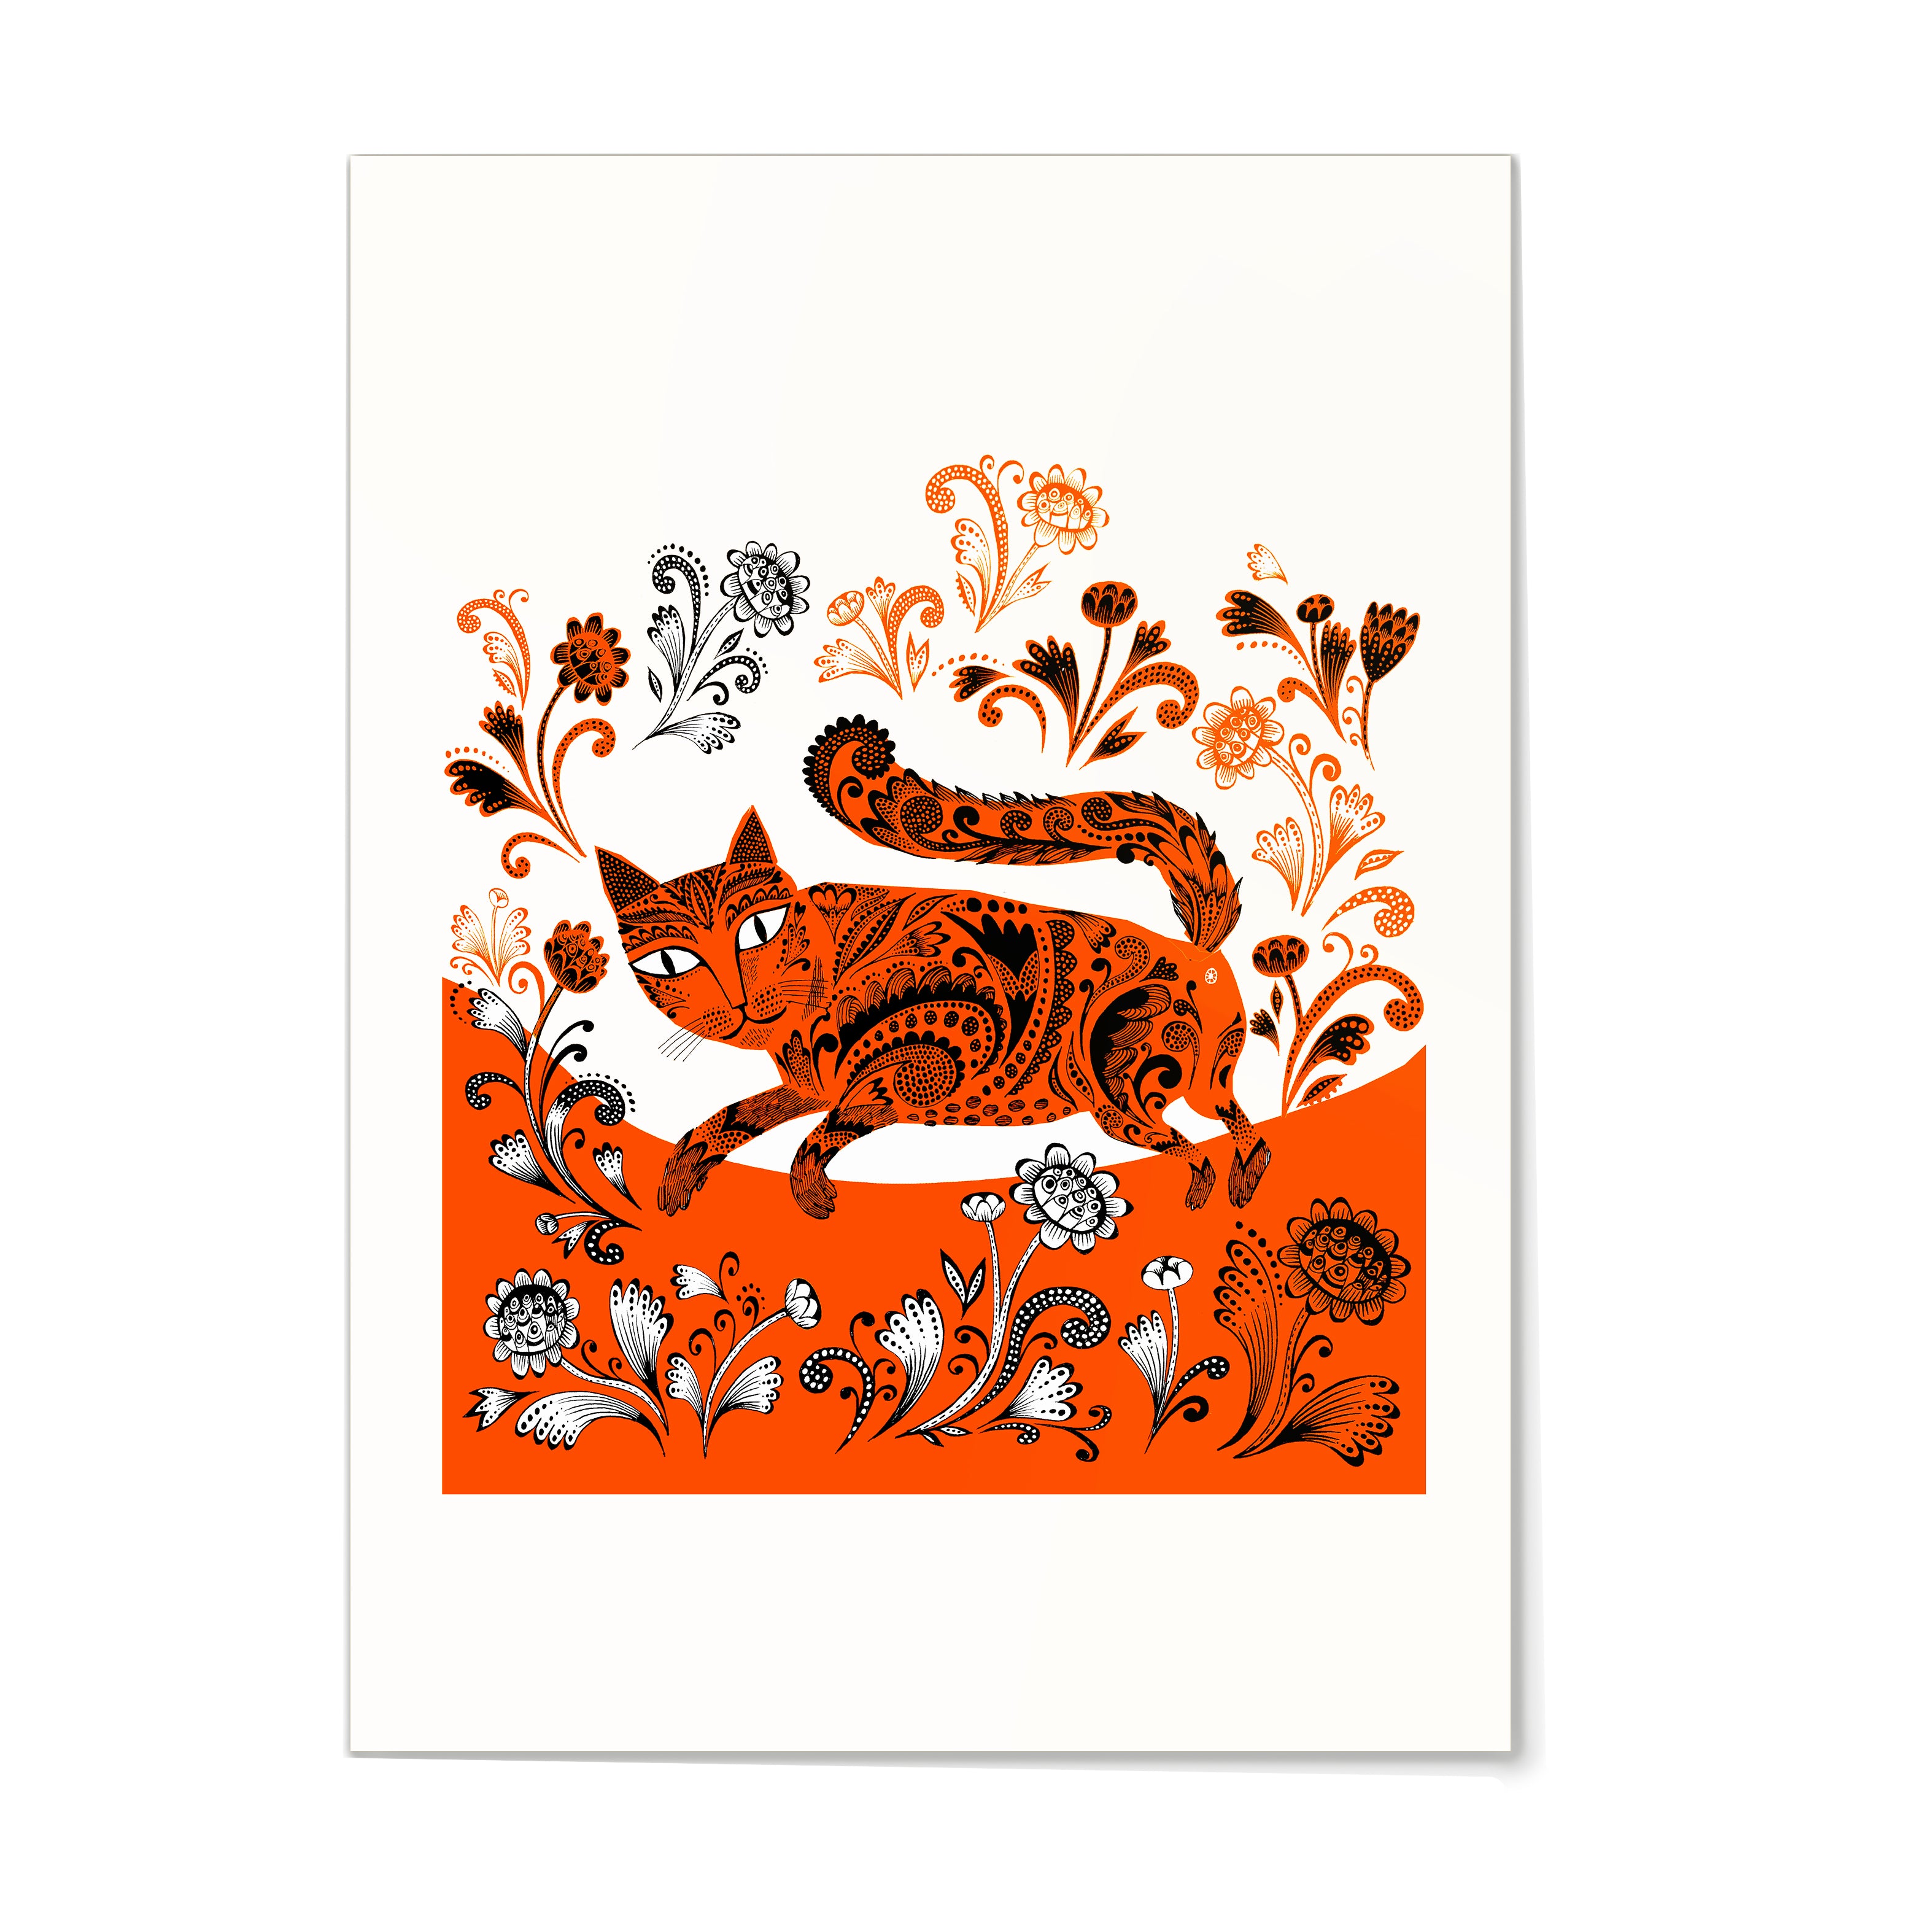 Lush Designs pint of cat among flowers in orange and black